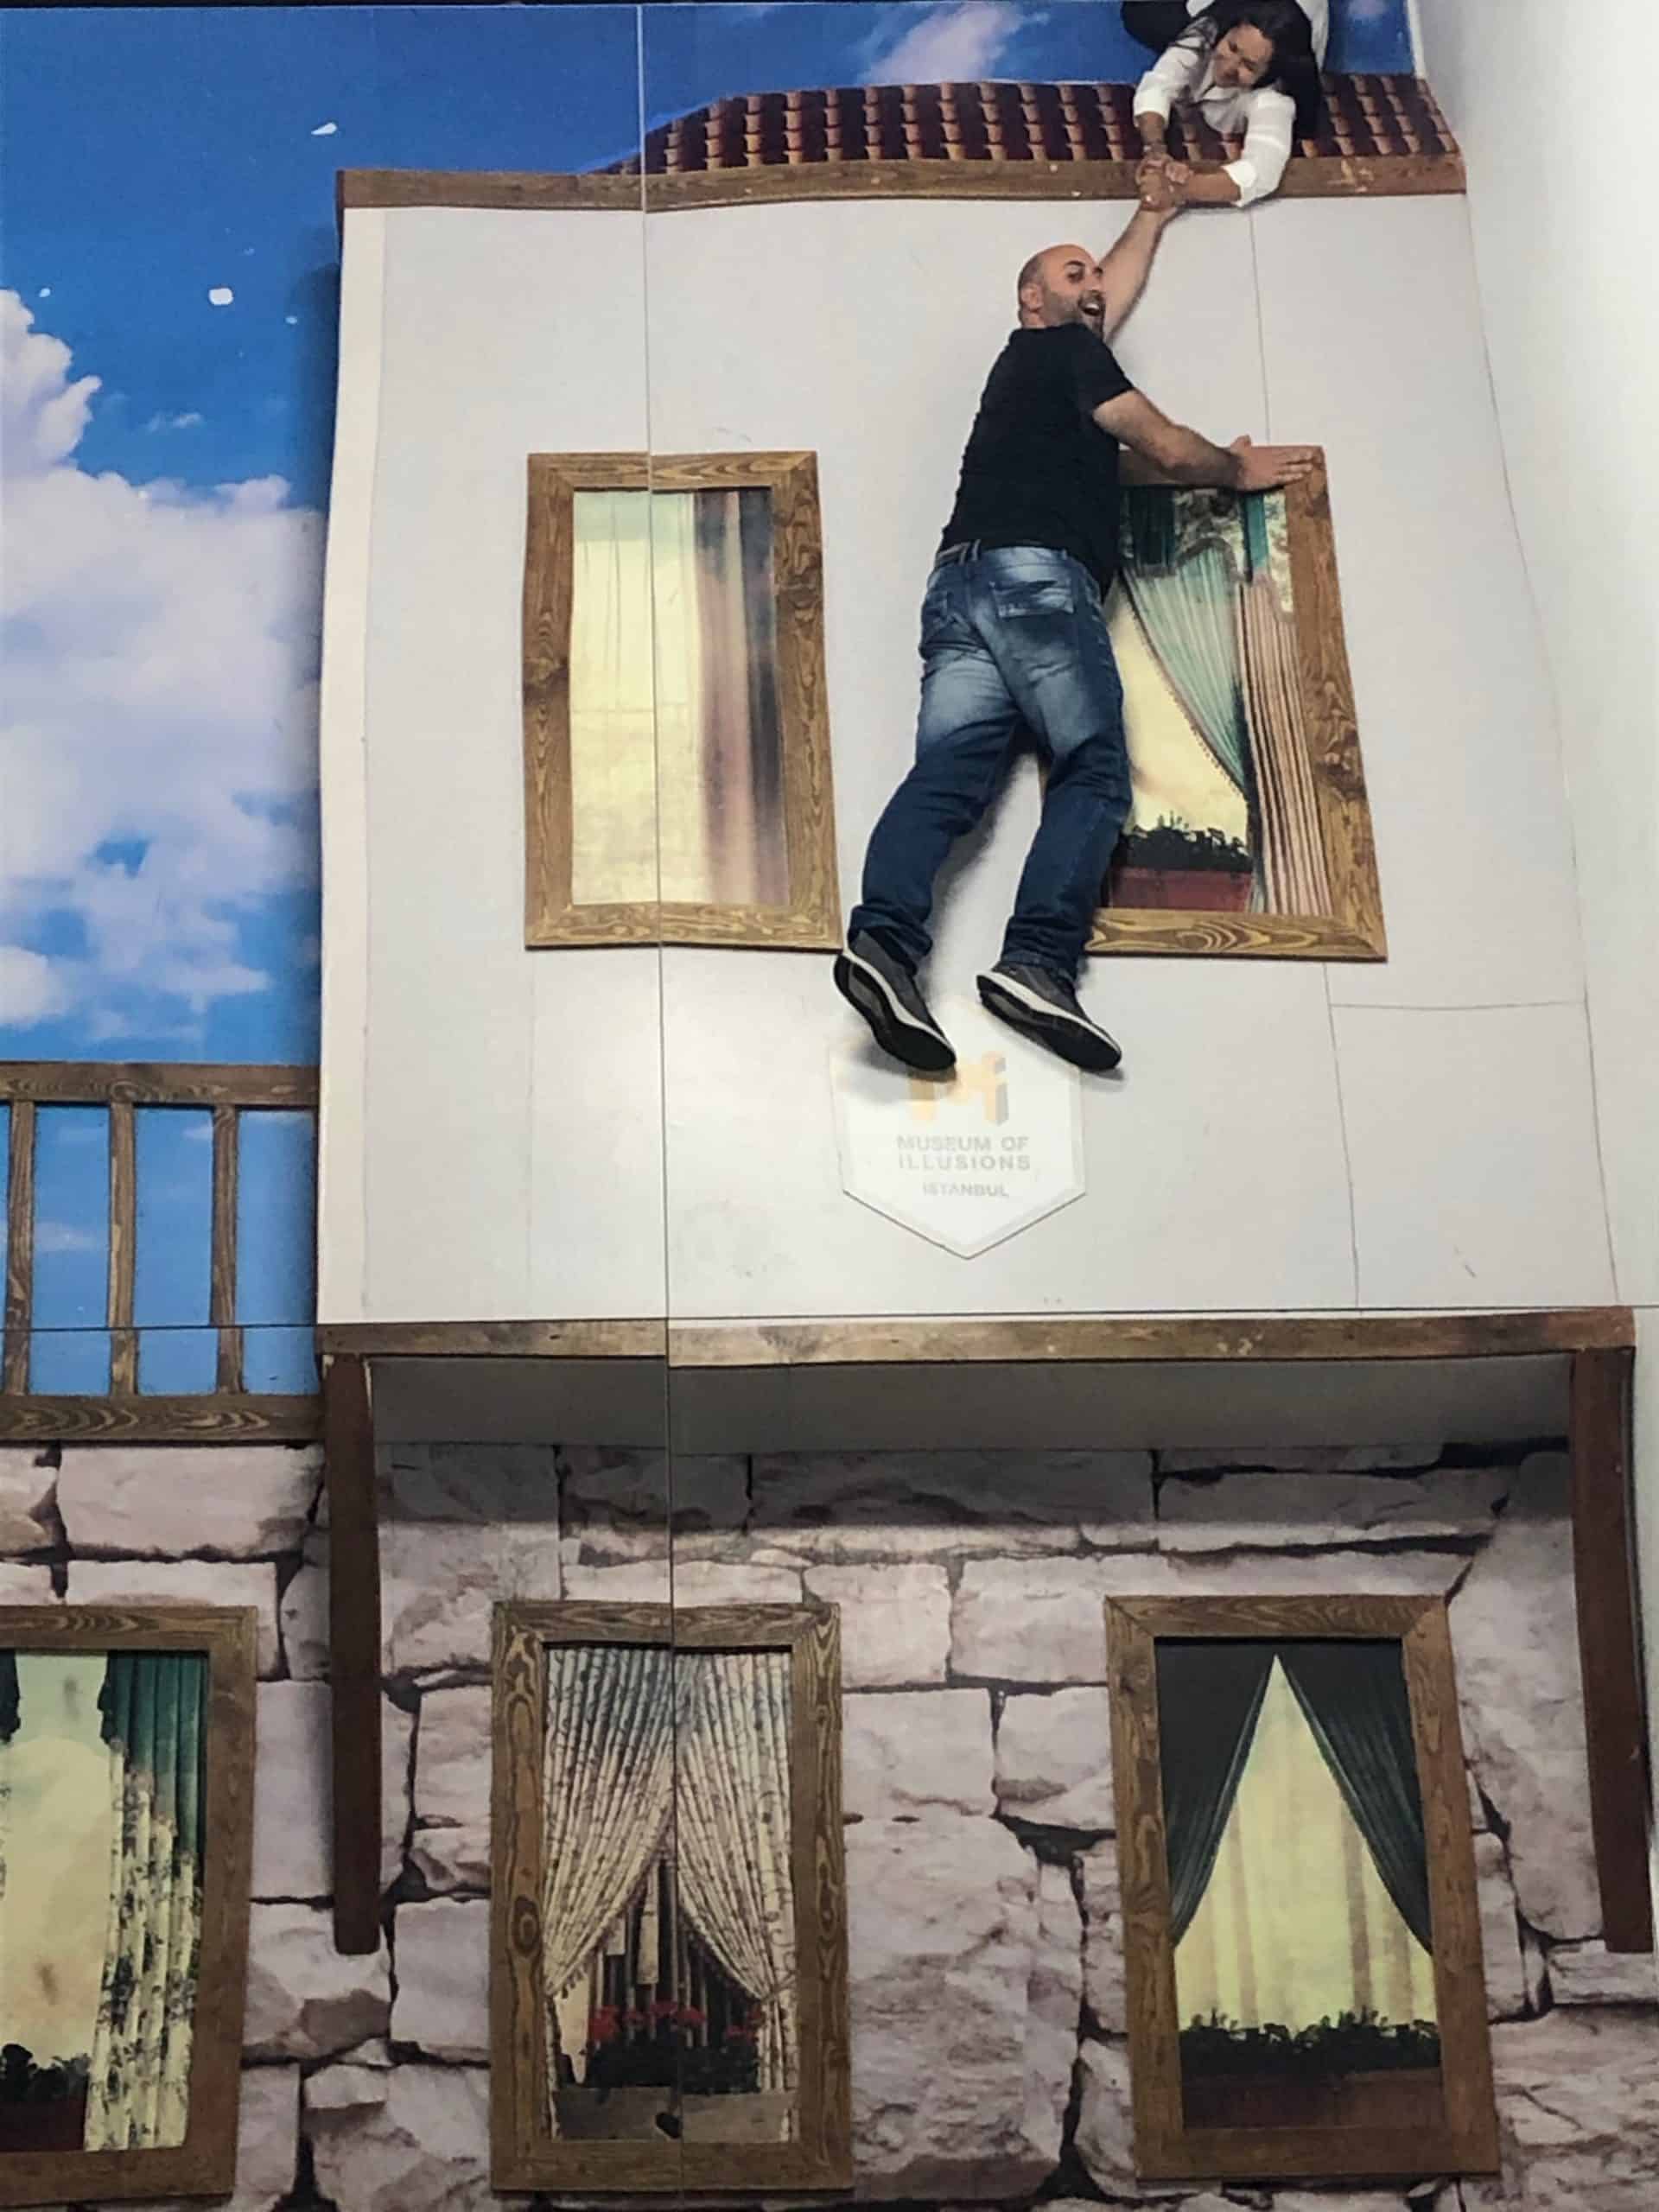 Falling off a building at the Museum of Illusions